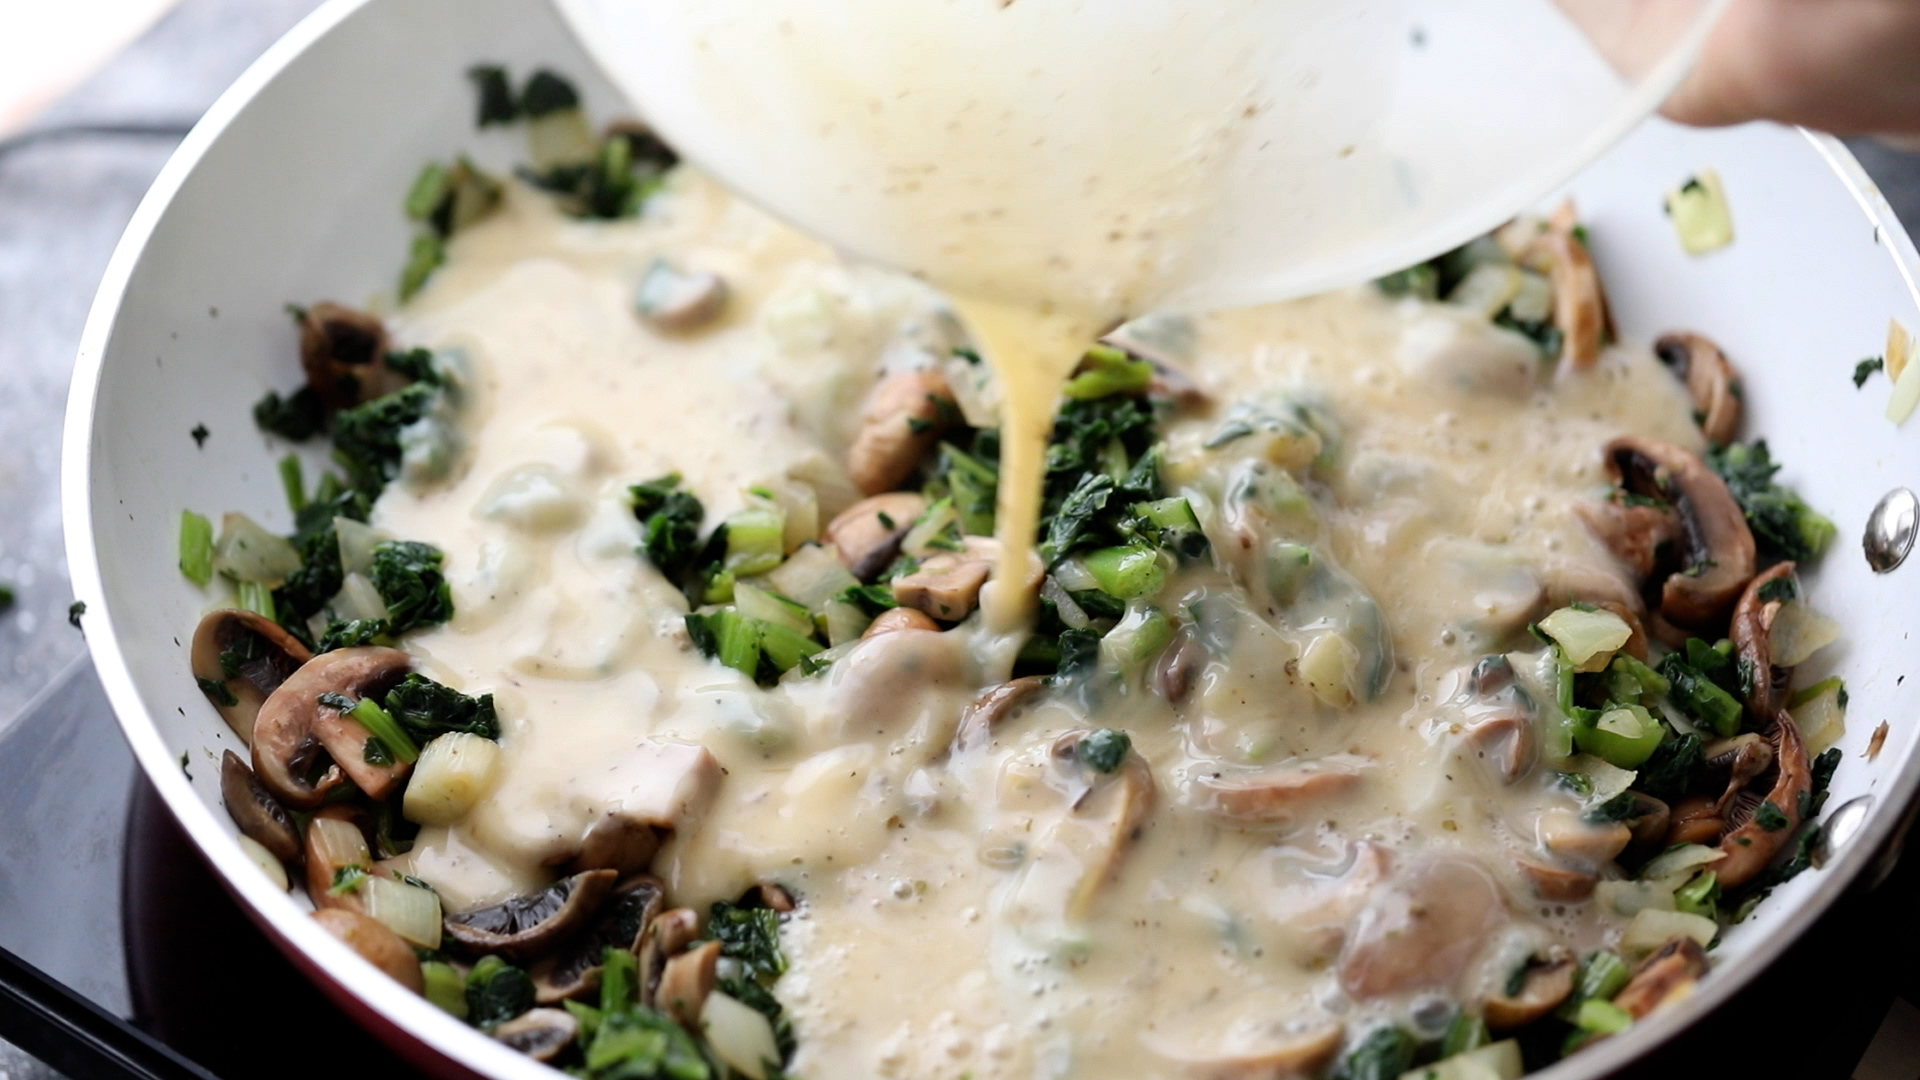 pouring eggs over sauteed mushrooms, kale and onion